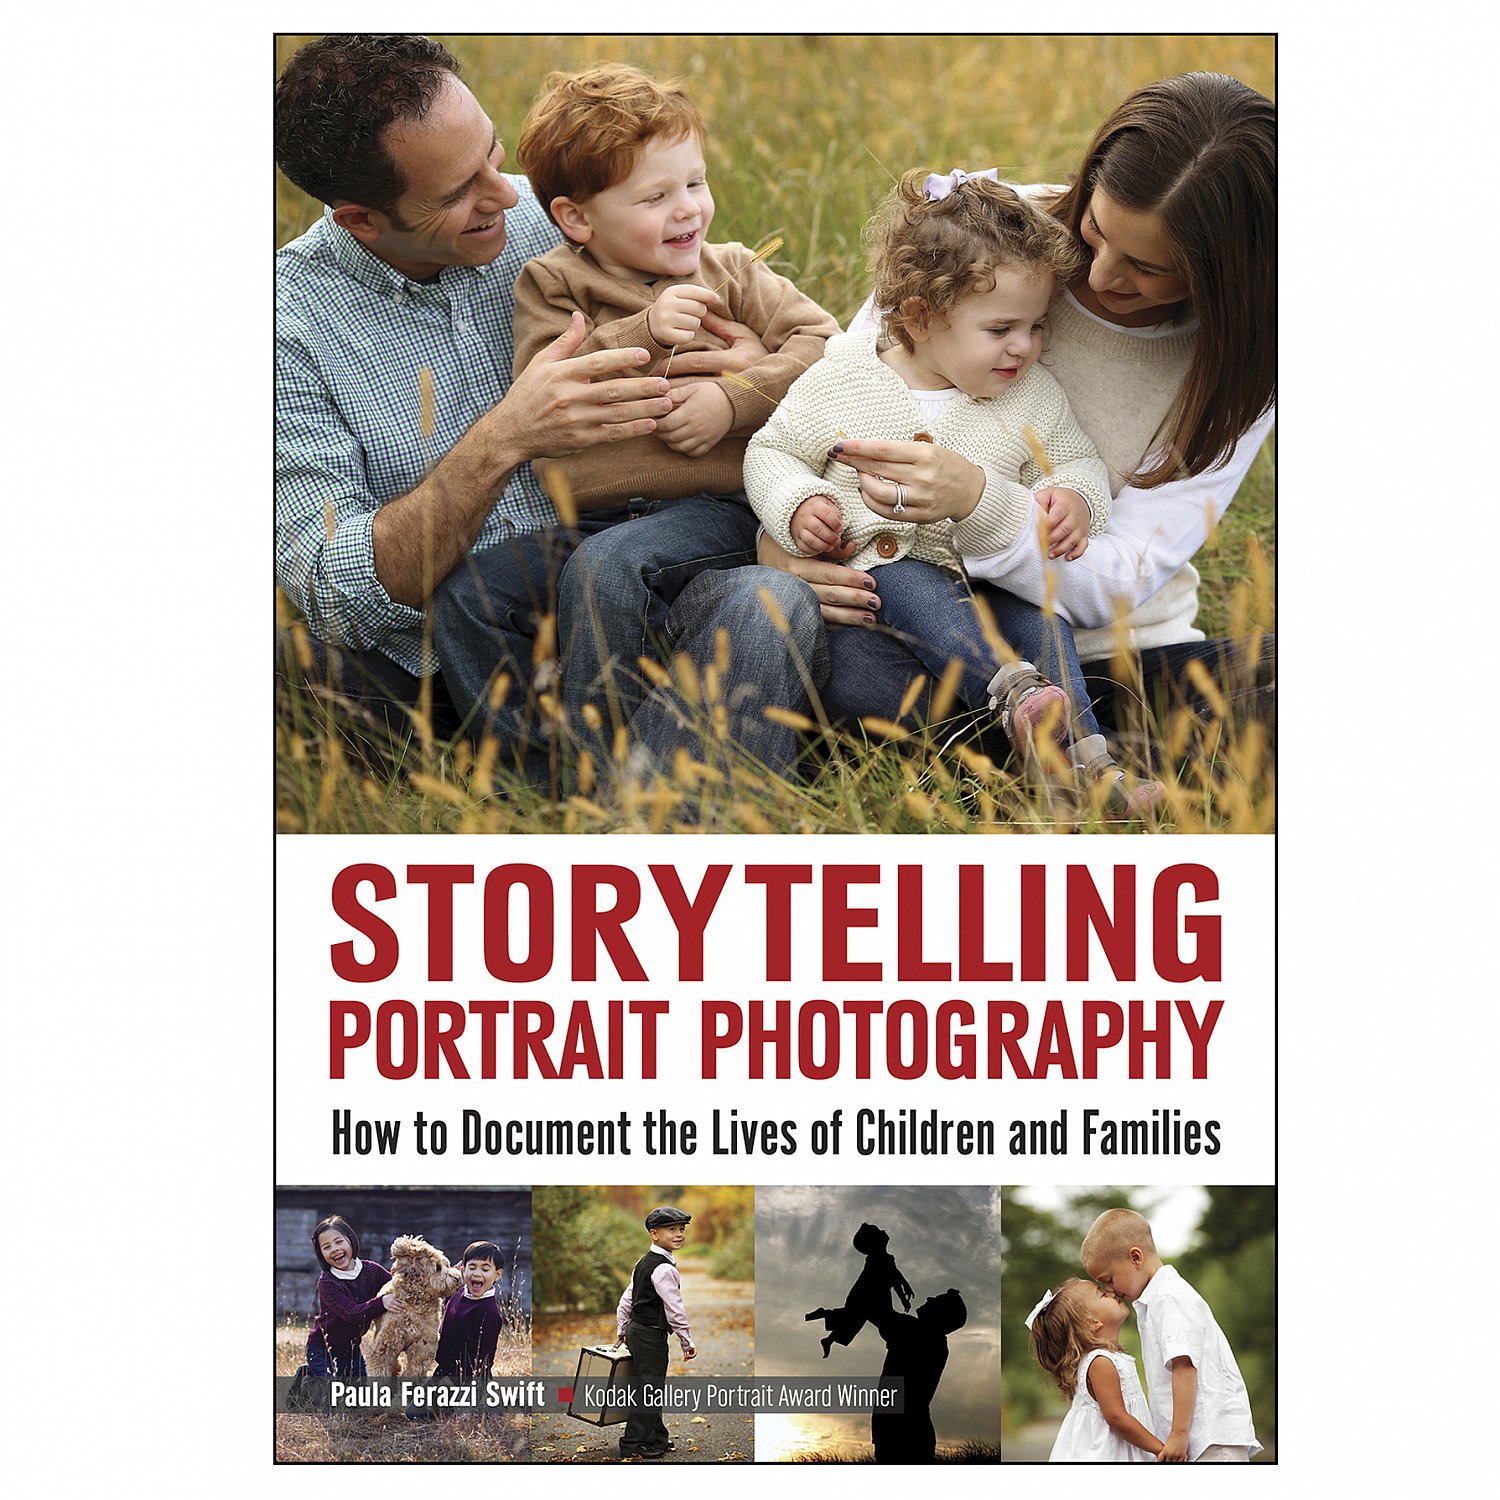 Storytelling Portrait Photography - How to Document the Lives of Children and Families Book | storytelling_portrait_photography_book.jpg